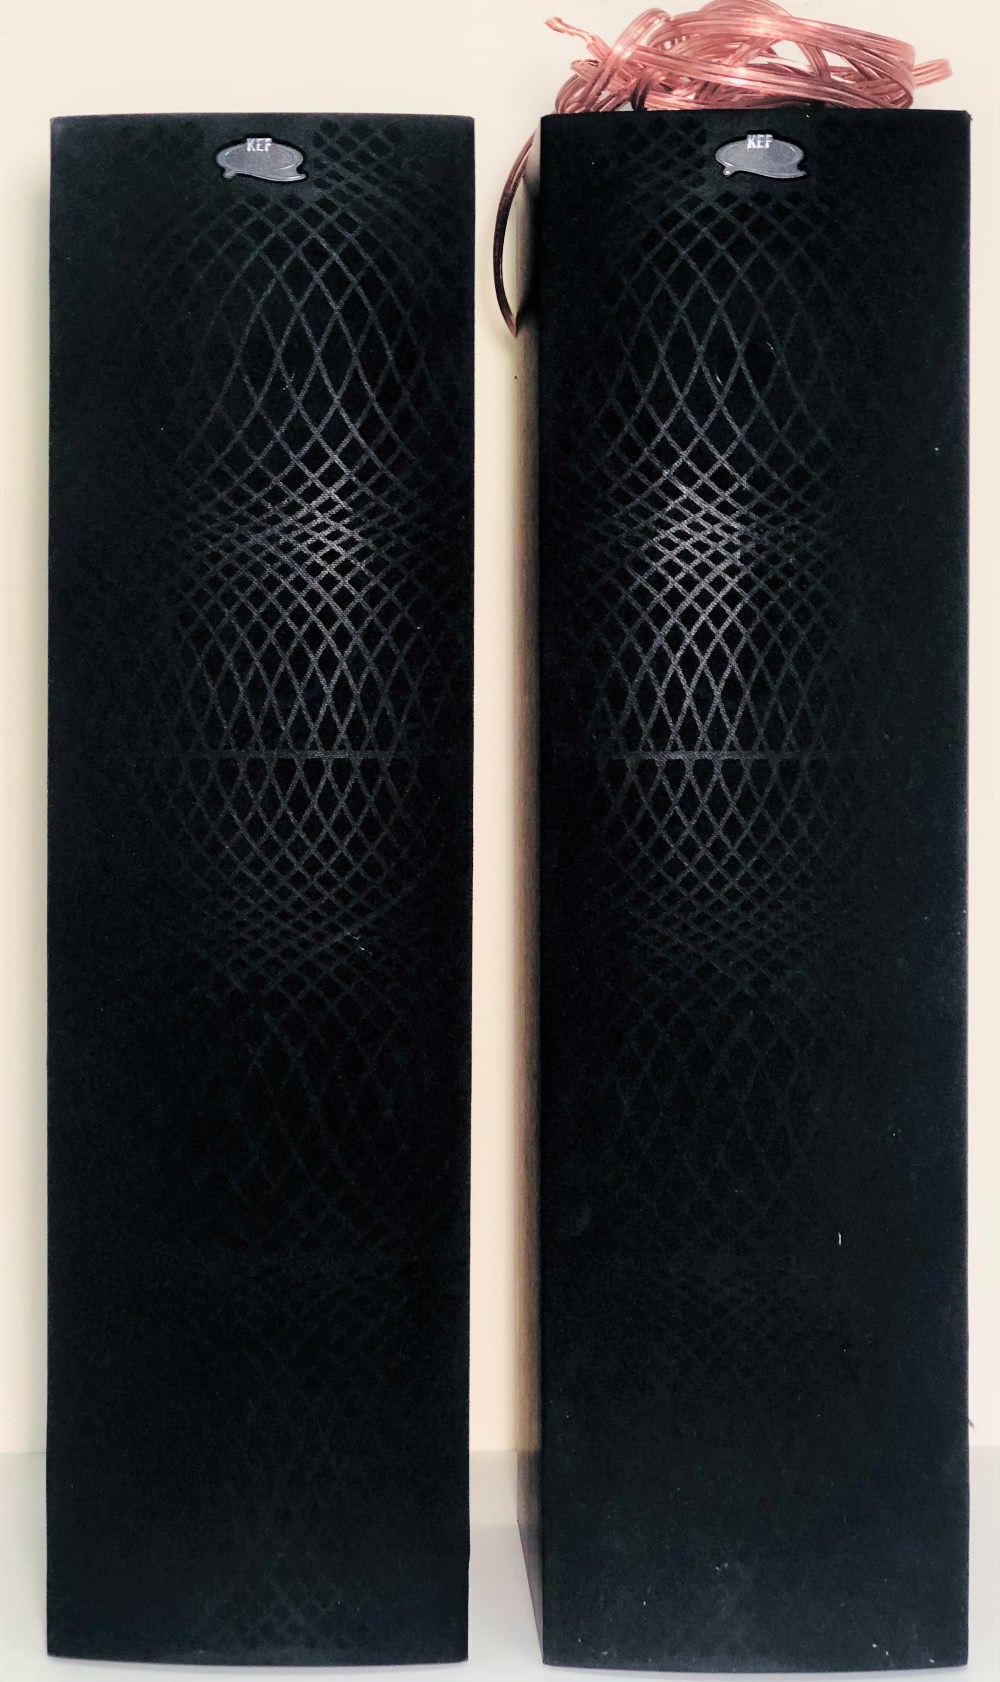 KEF Q35 SPEAKERS. A pair of Kef Q35 speakers, with some cabling.